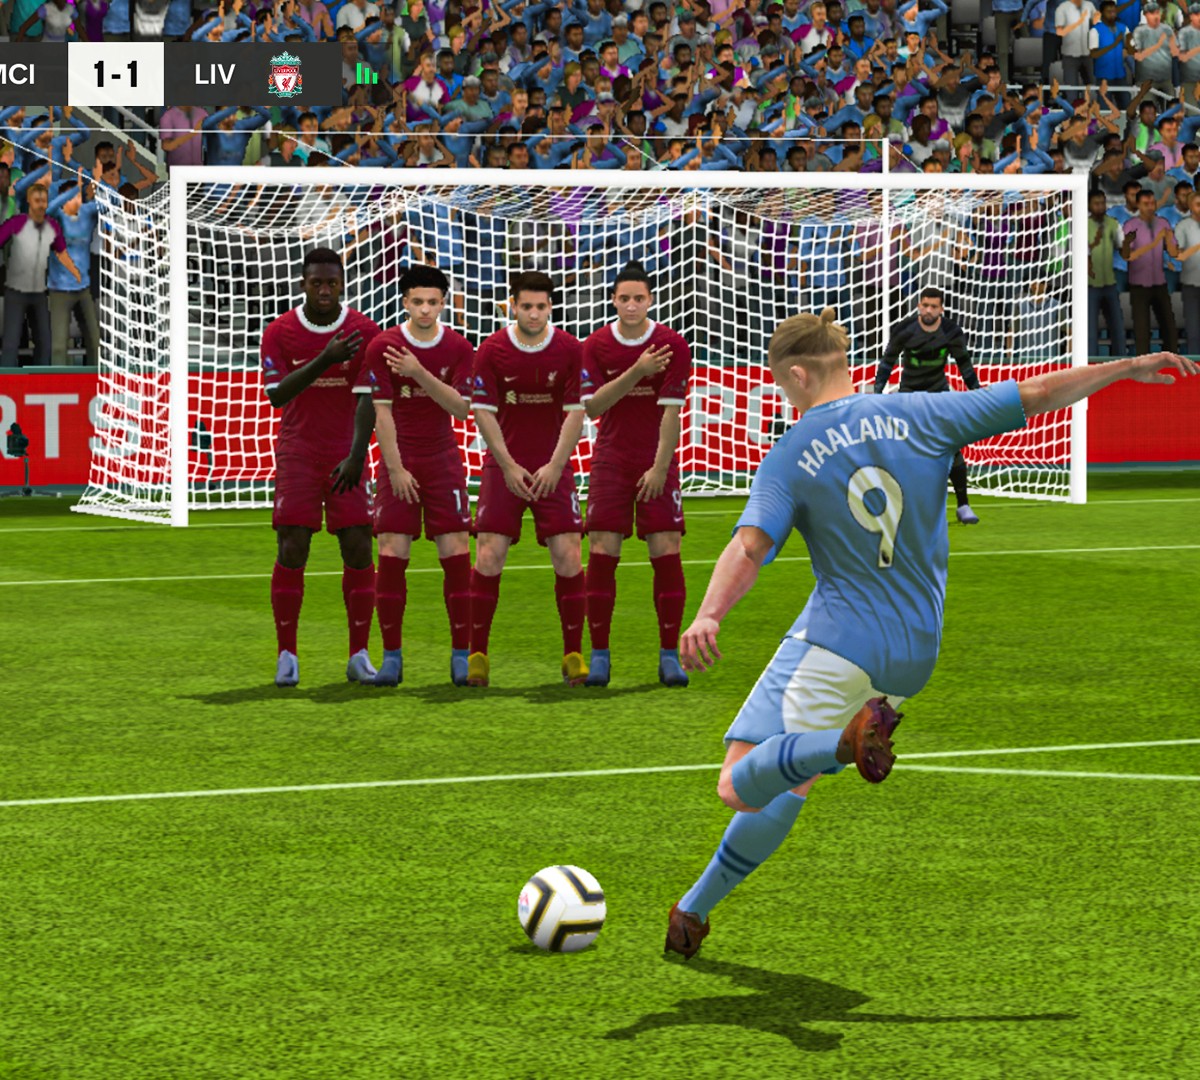 EA SPORTS FC™ Mobile Football on the App Store